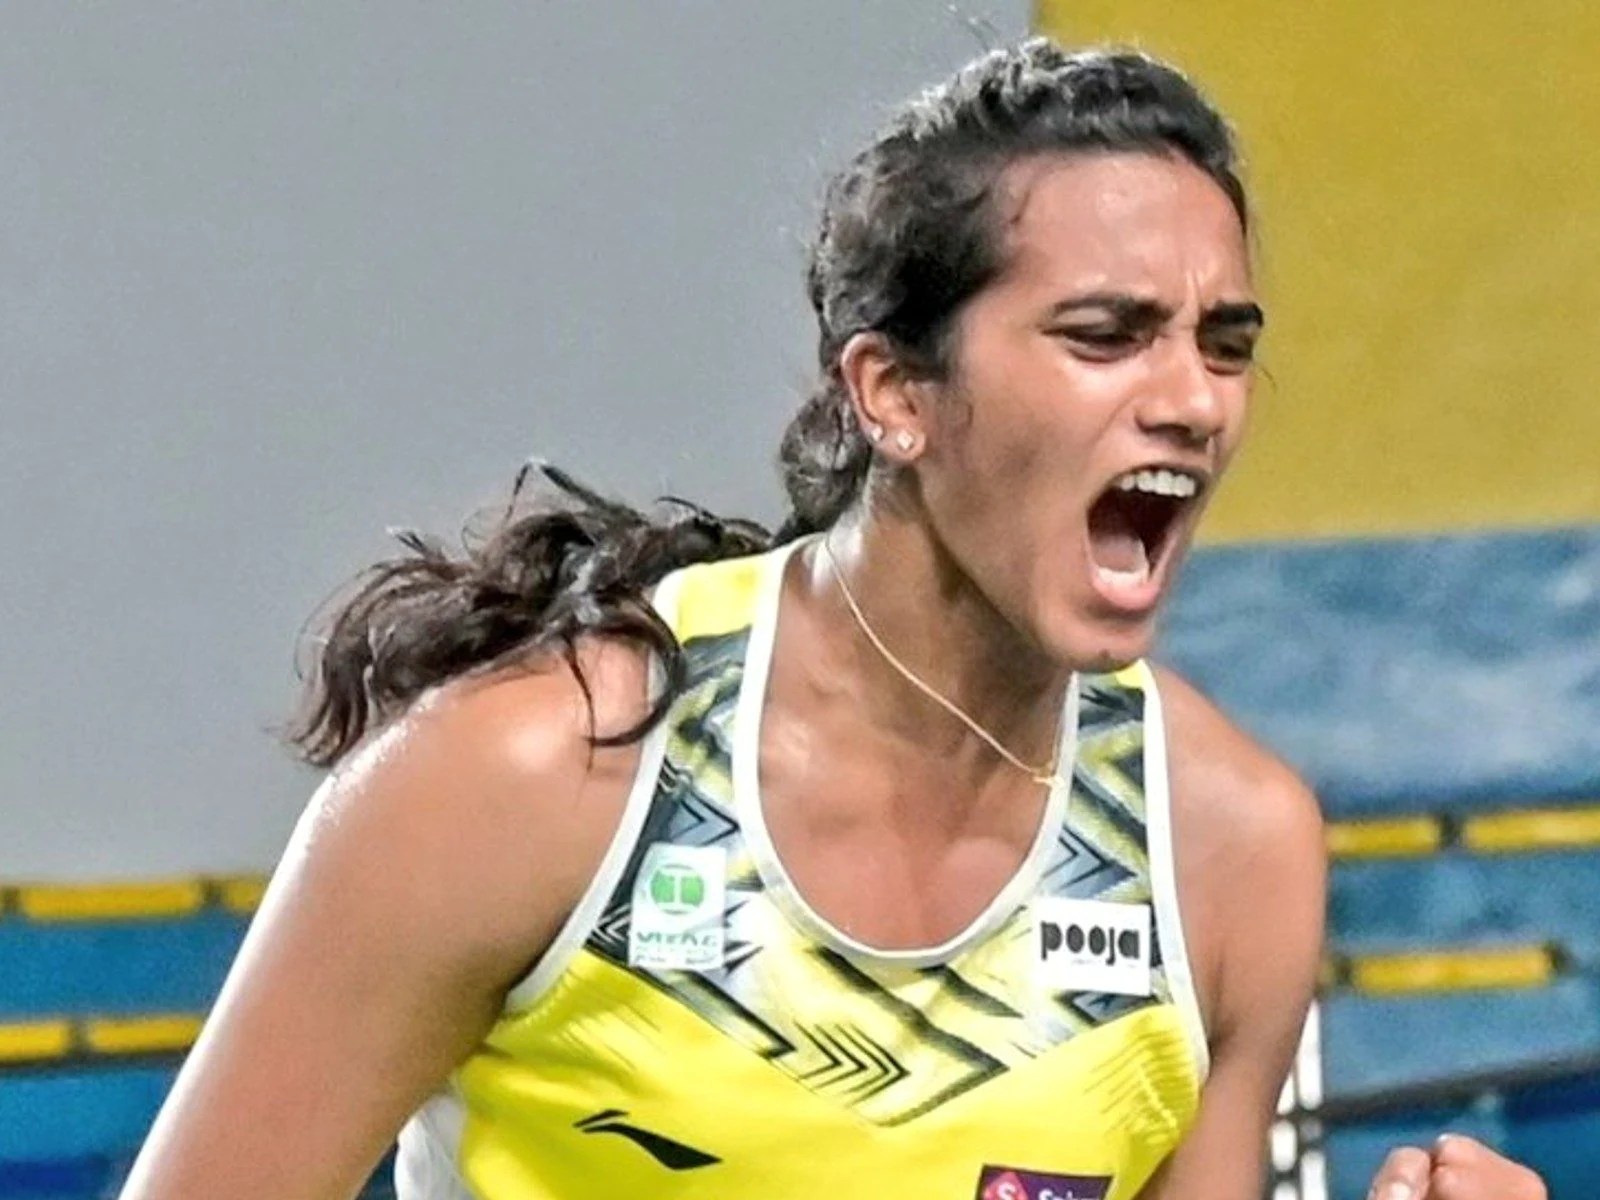 CWG 2022: Badminton at CWG: Focus on PV Sindhu but doubles key to India retaining mixed team gold